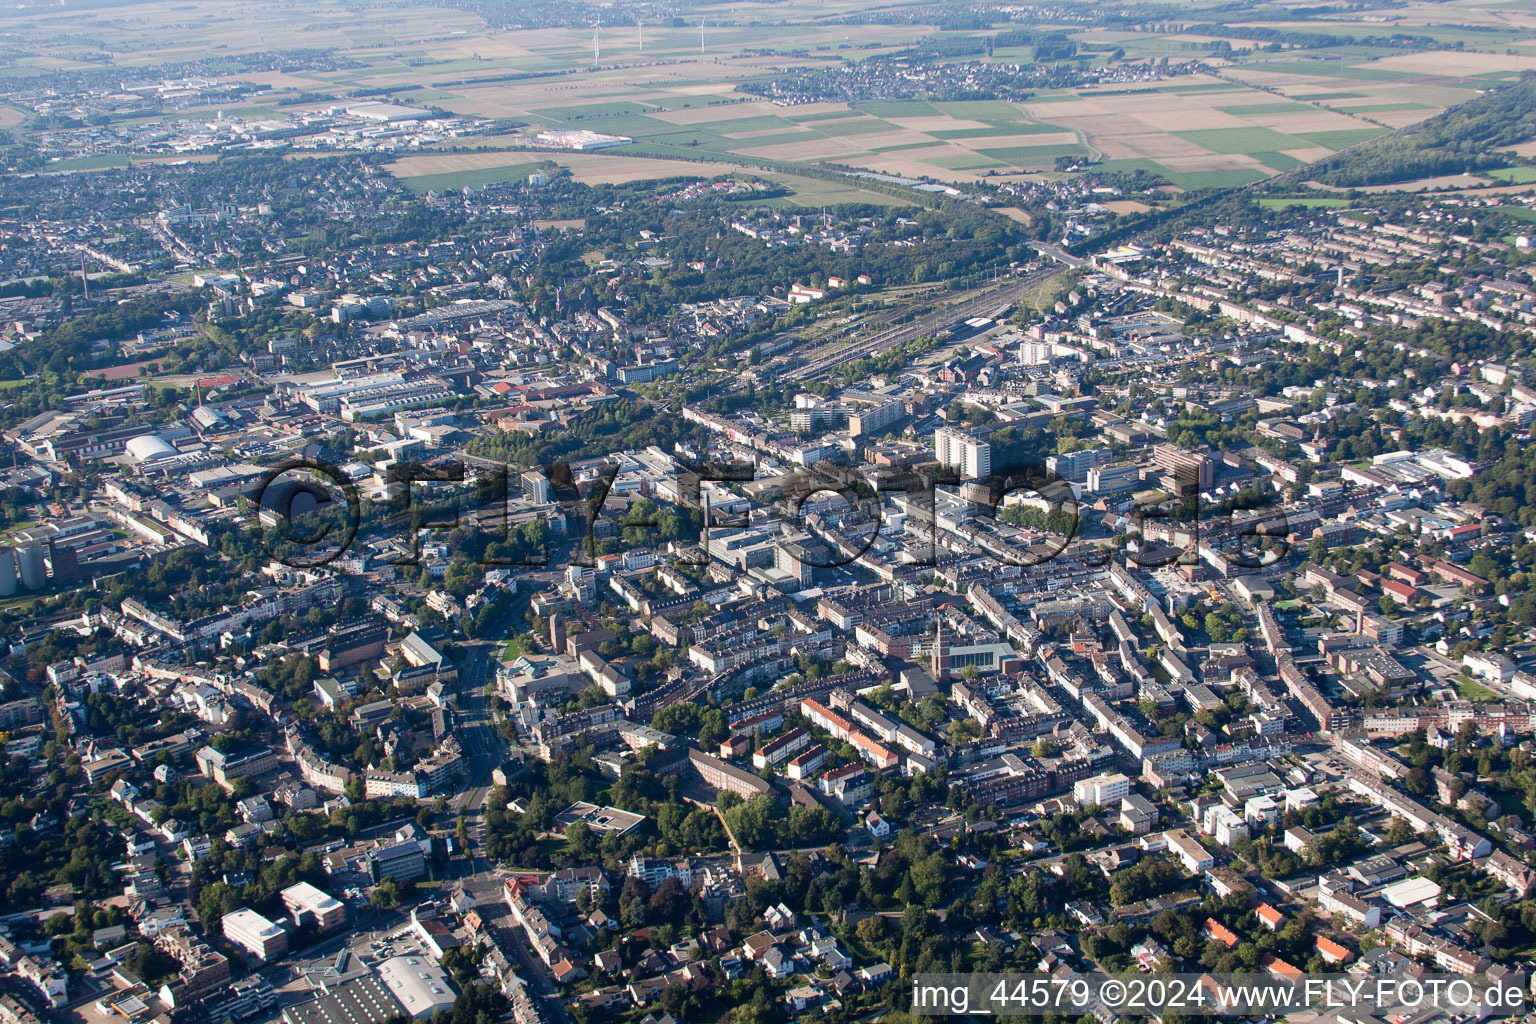 Town View of the streets and houses of the residential areas in the district Guerzenich in Dueren in the state North Rhine-Westphalia